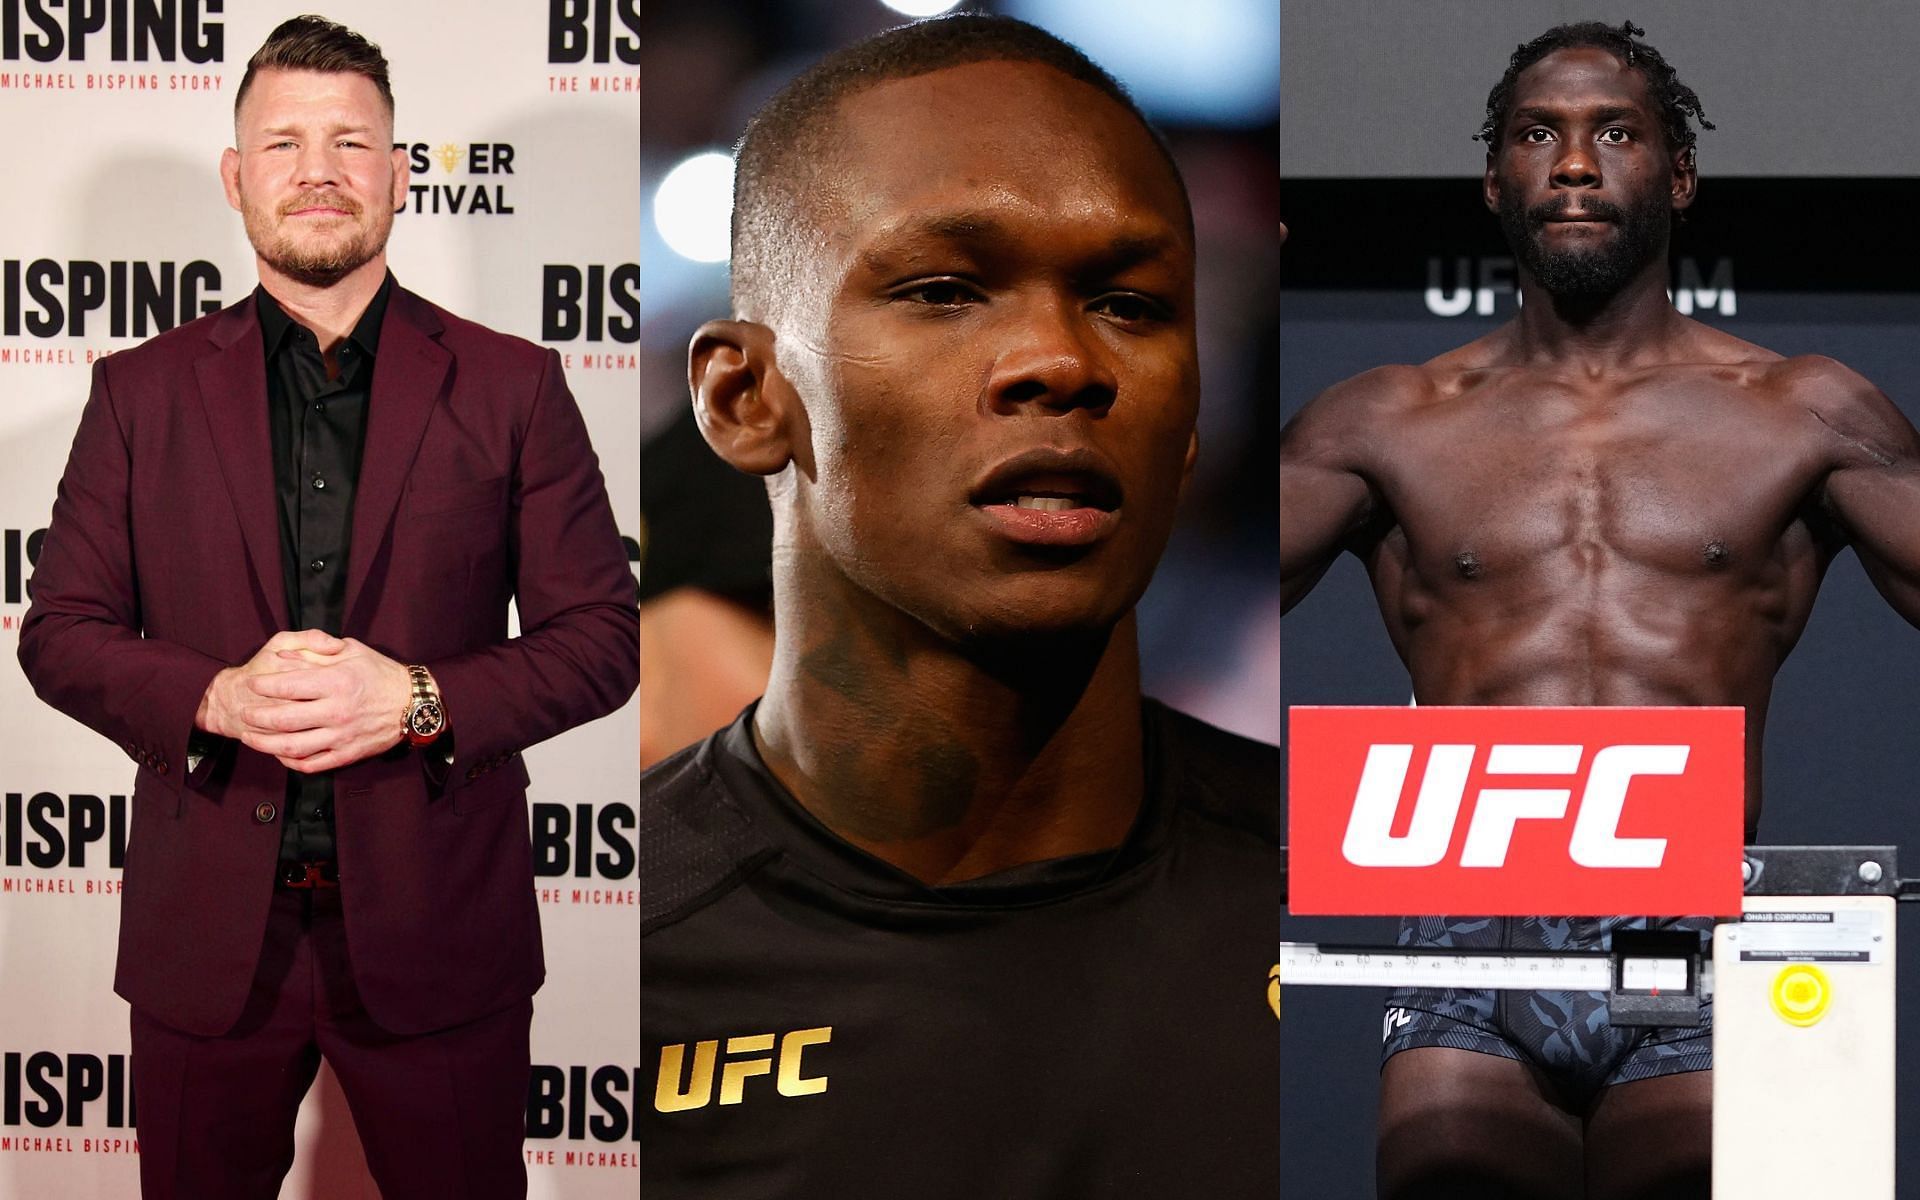 Michael Bisping (left, image courtesy of @mikebisping on Instagram); Israel Adesanya and Jared Cannonier (center and right, images courtesy of Getty)